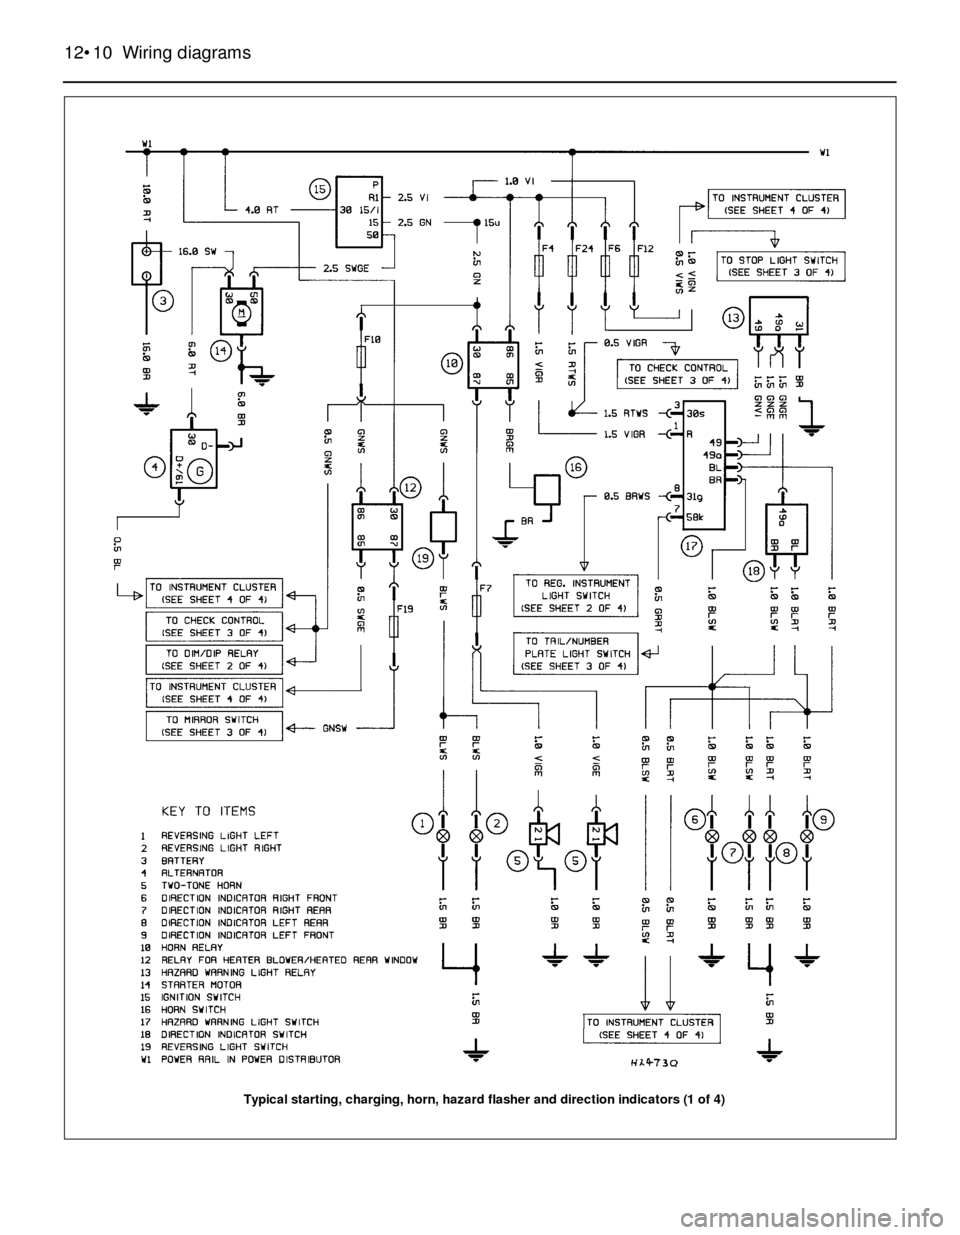 BMW 3 SERIES 1988 E30 Workshop Manual 12•10 Wiring diagrams
Typical starting, charging, horn, hazard flasher and direction indicators (1 of 4) 